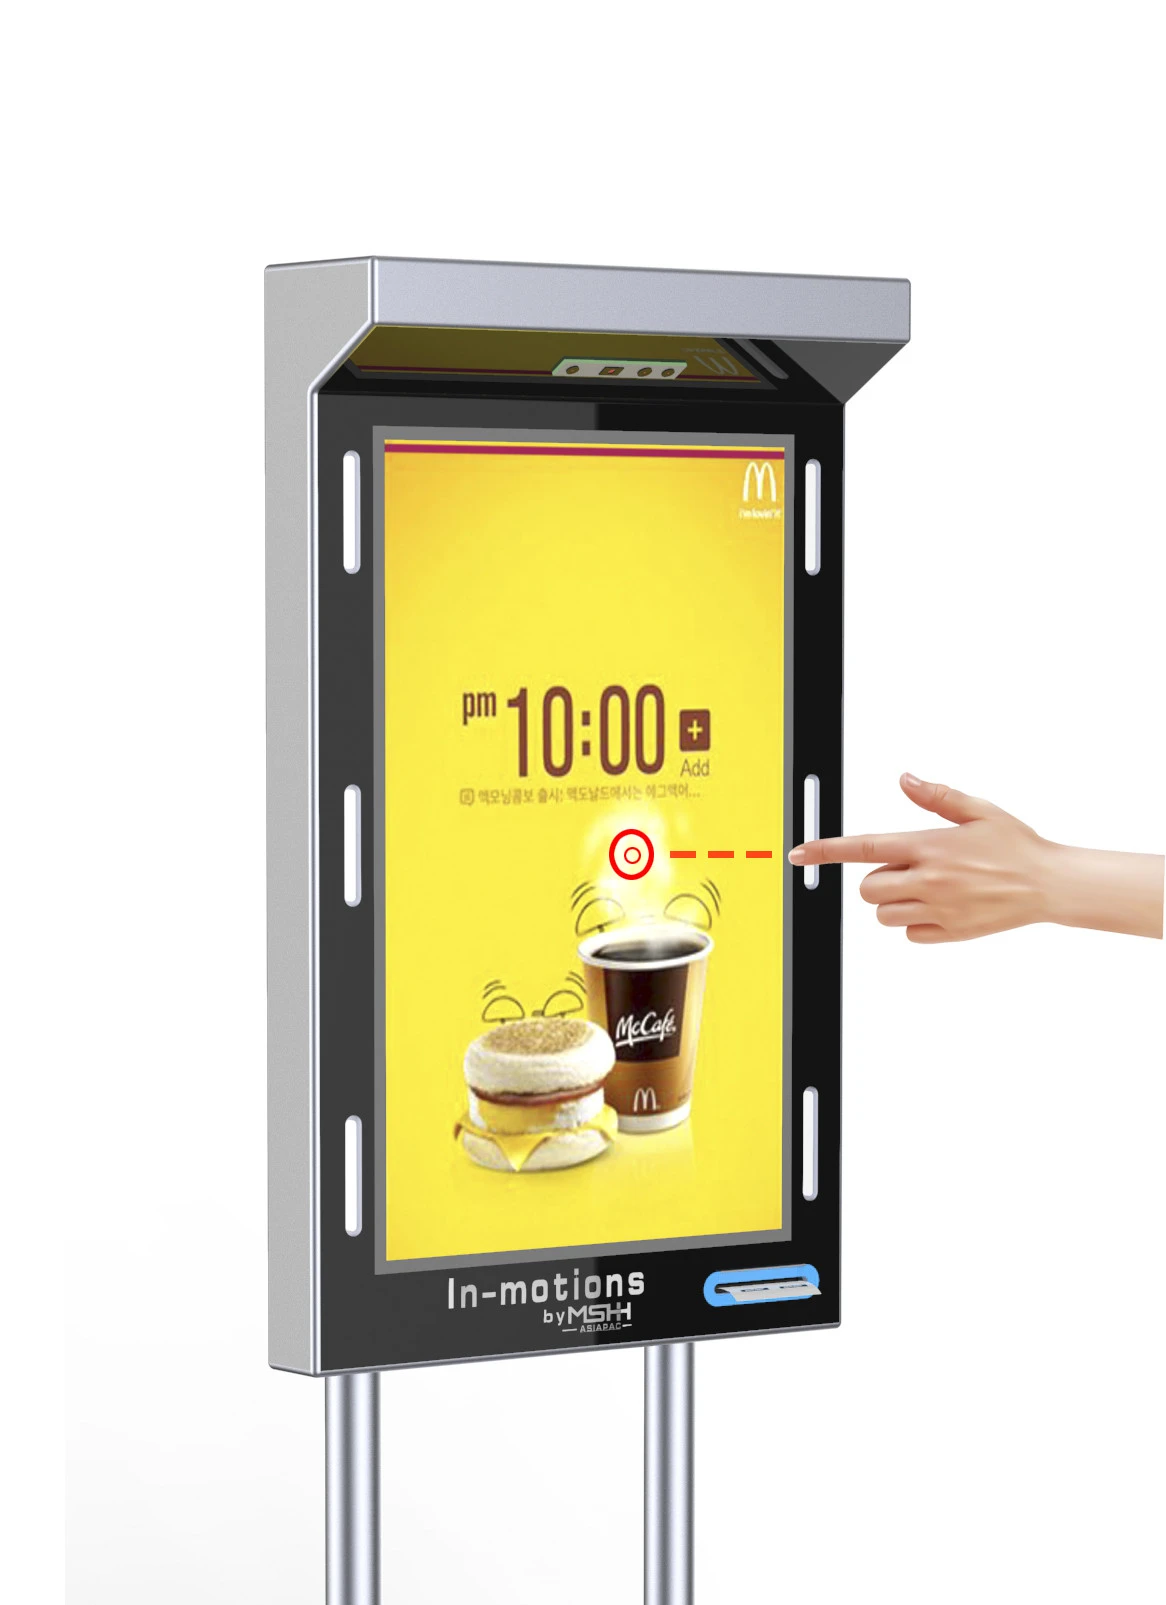 In-Motions Brand Gesture Food Ordering And Payment Machine Food Payment Kiosk Air Touch From Singapore